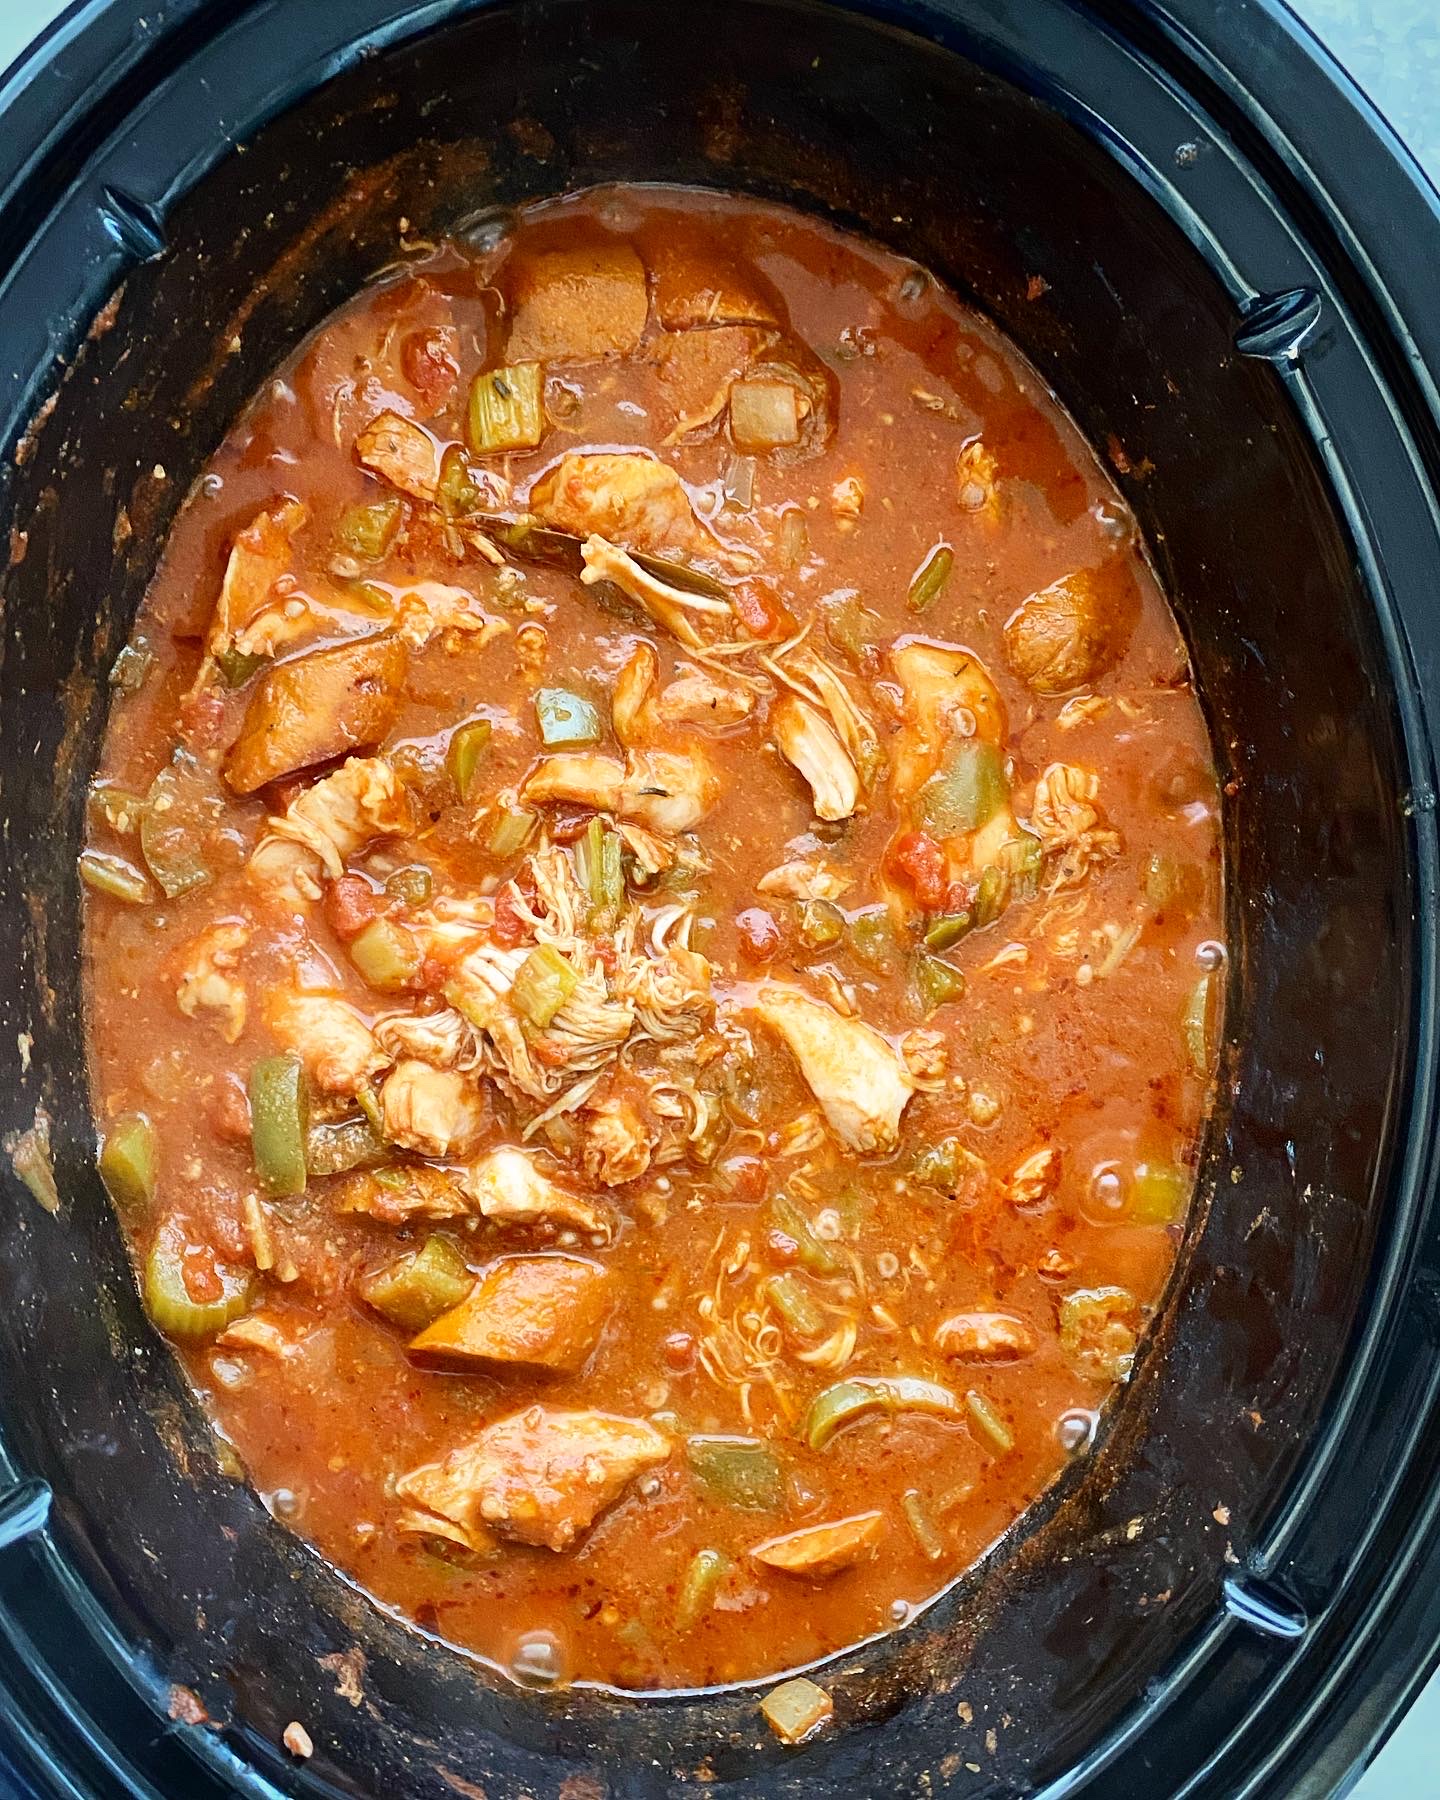 cooked gumbo in the crockpot